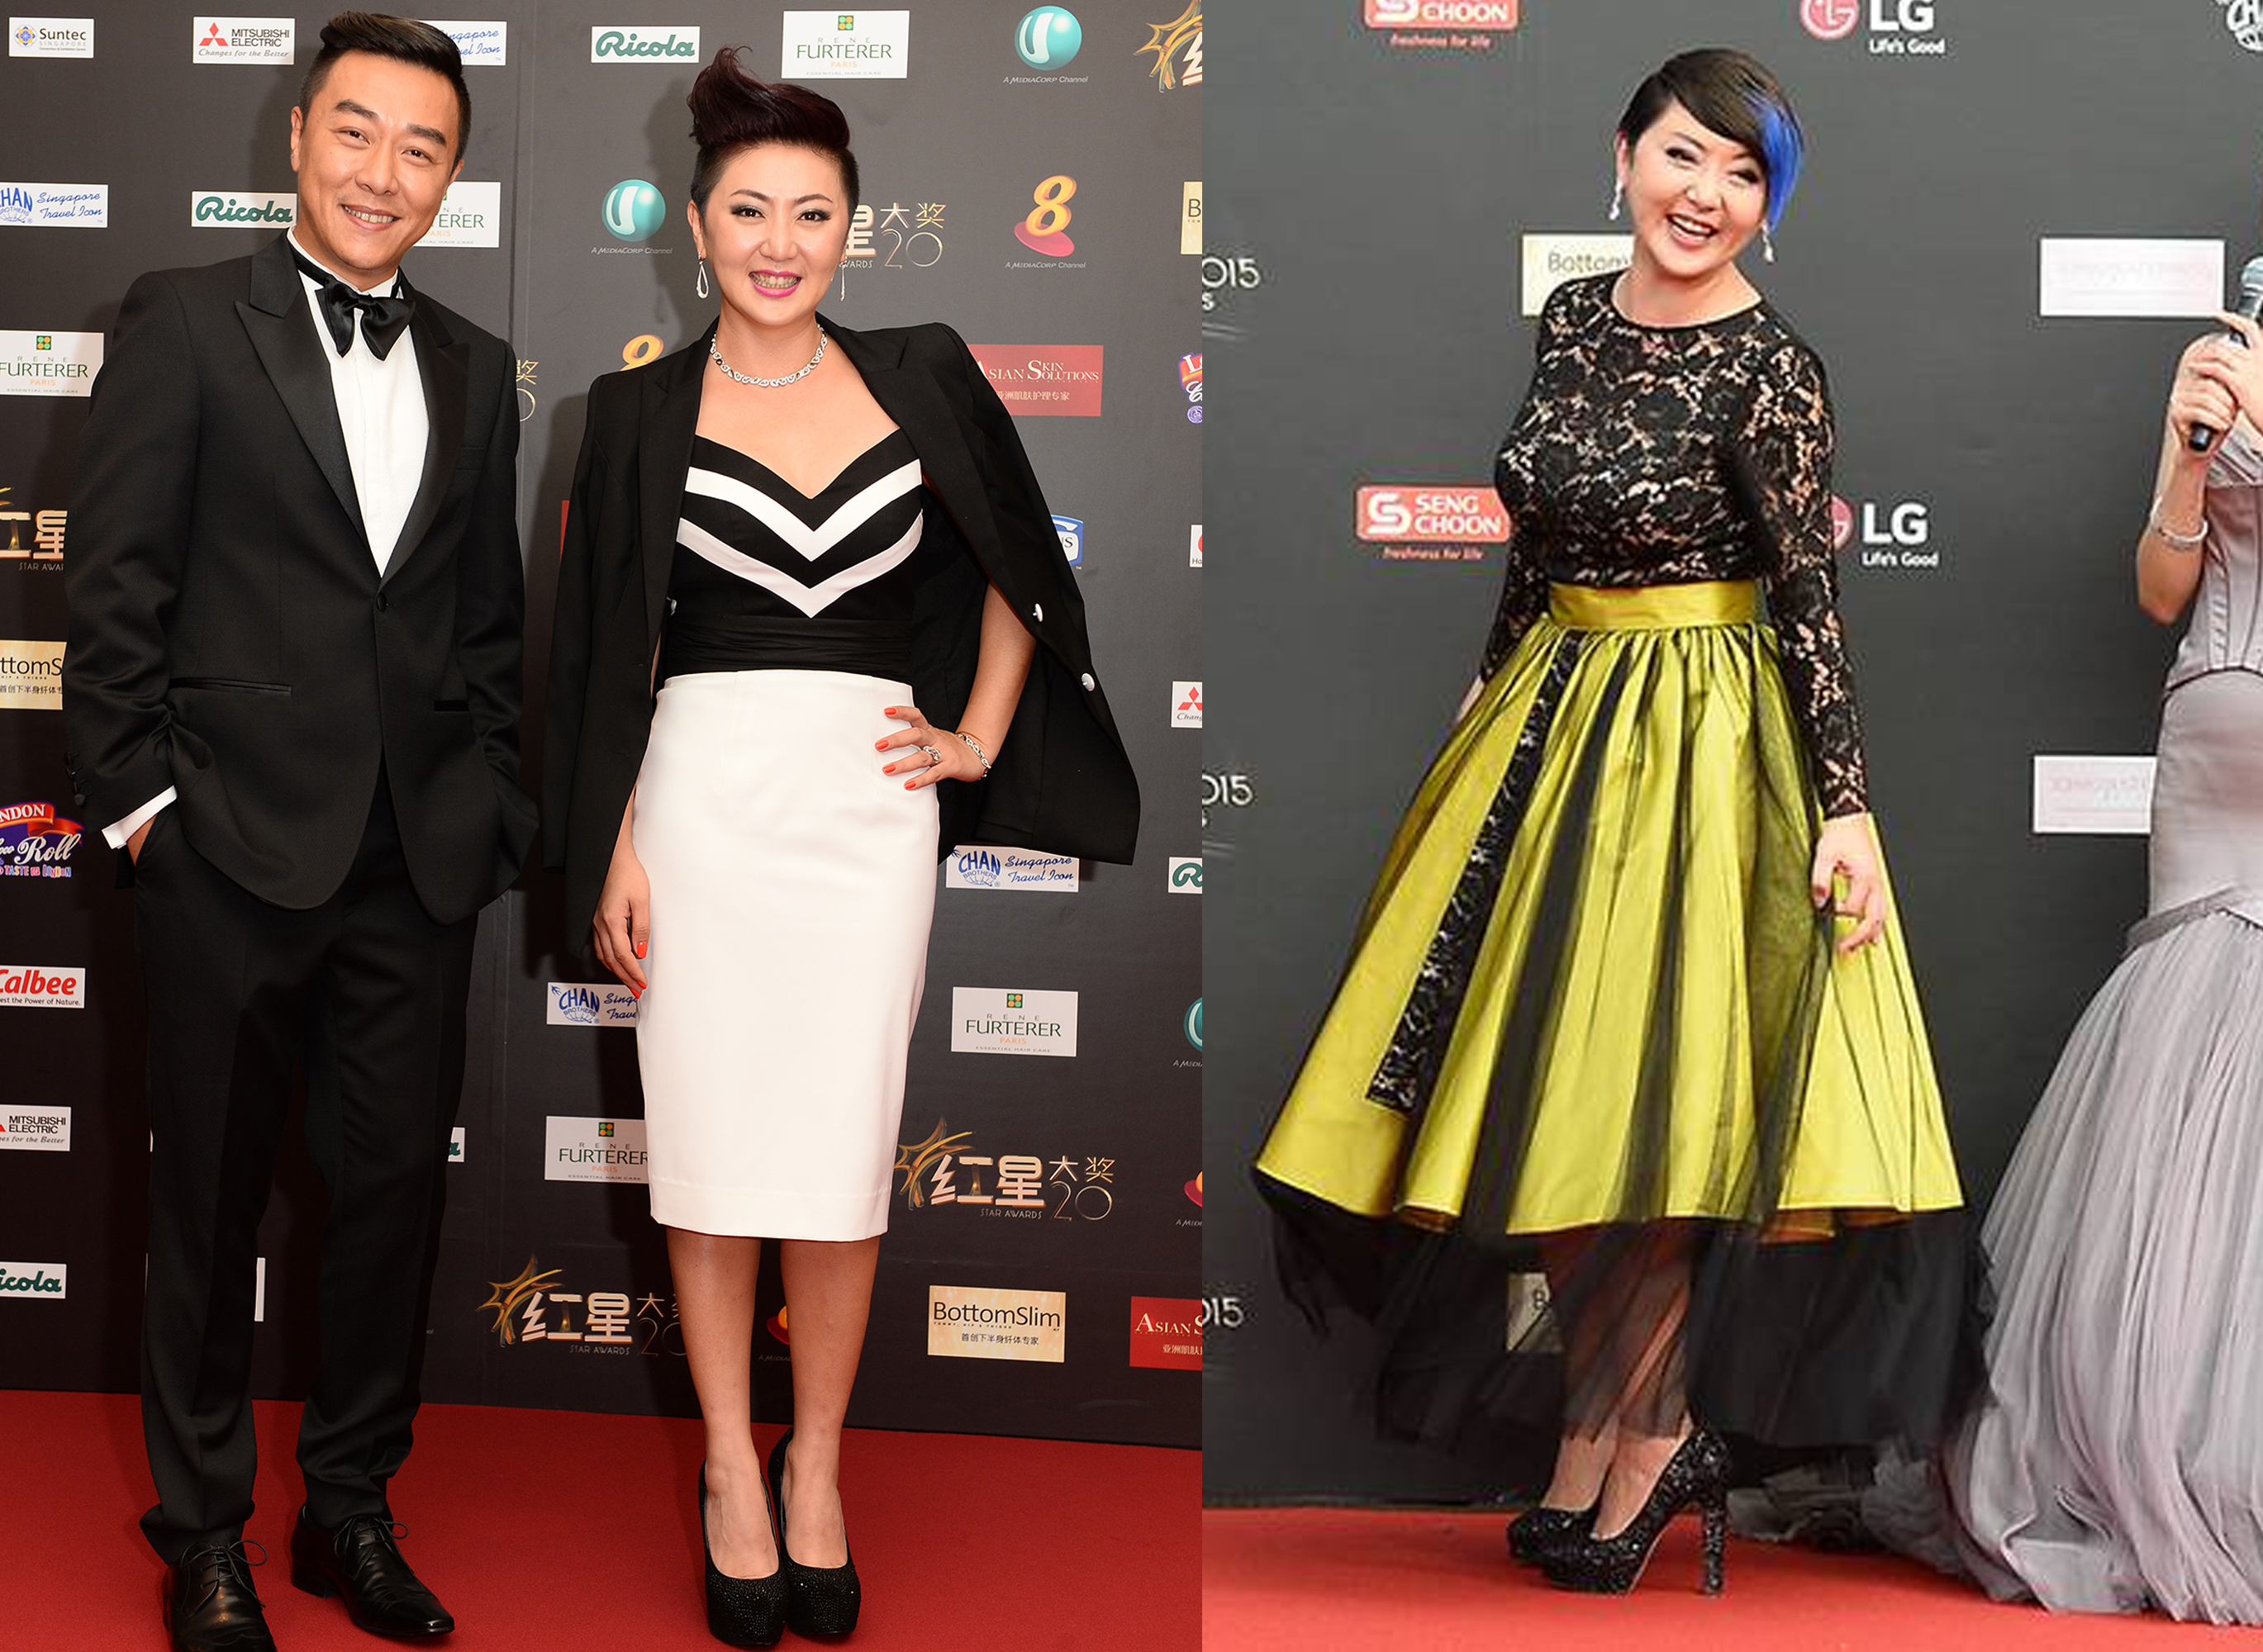 Yifeng wearing Eleanor's designs at the Star Awards in 2014 (left) and 2015 (right)